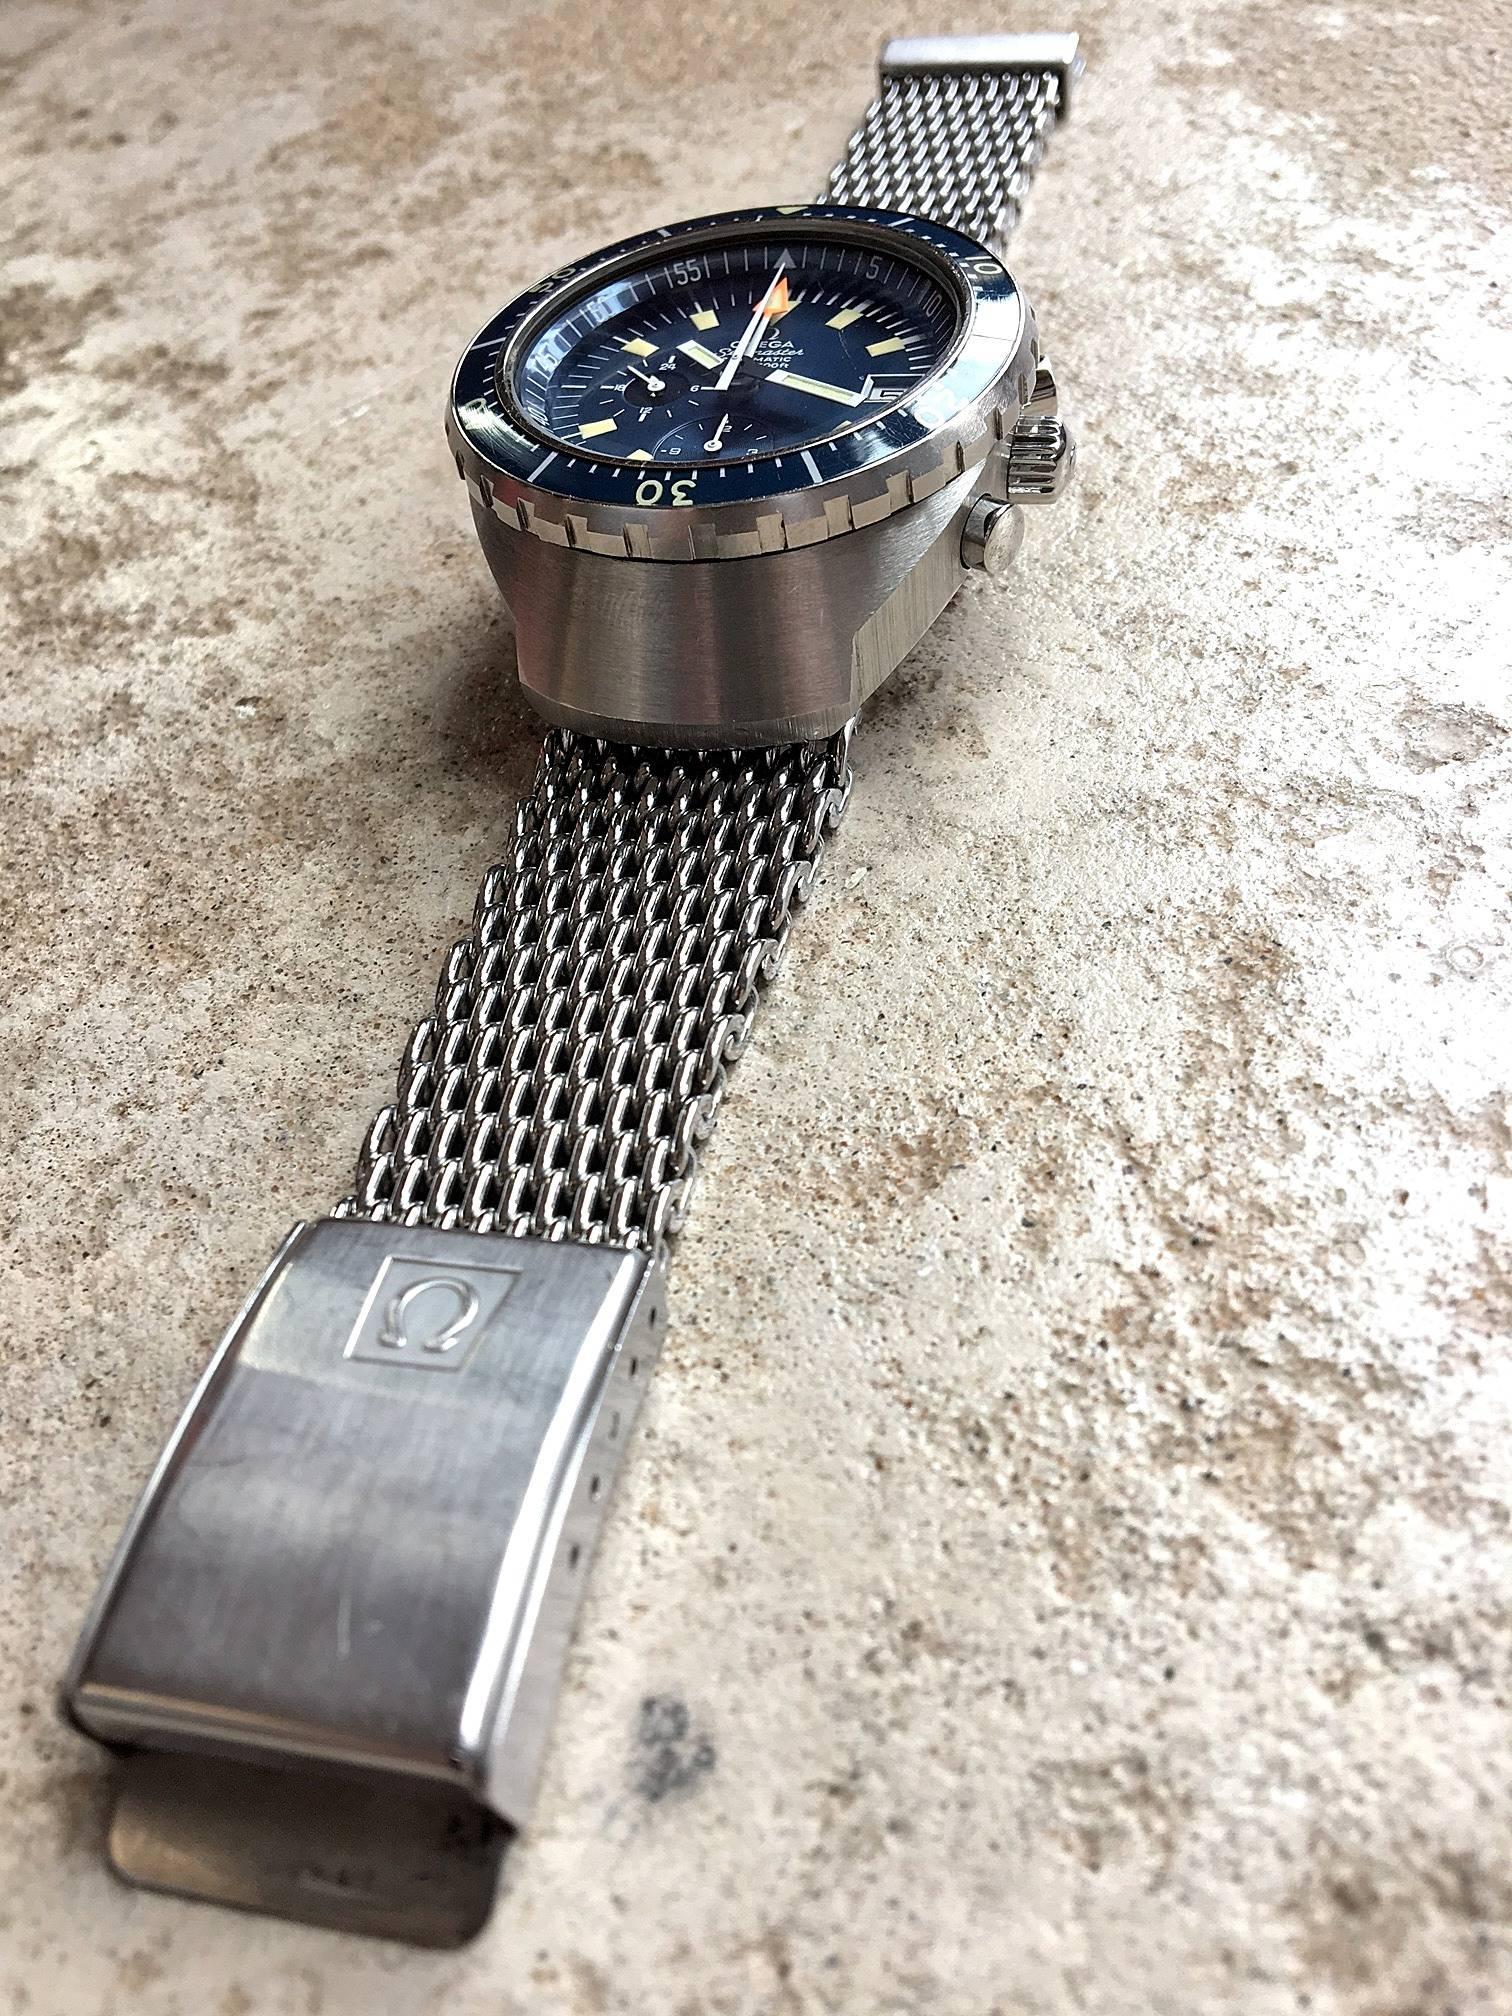 Stainless Steel Omega Seamaster 120m Automatic Chronograph 1971 a.k.a. Big Blue For Sale